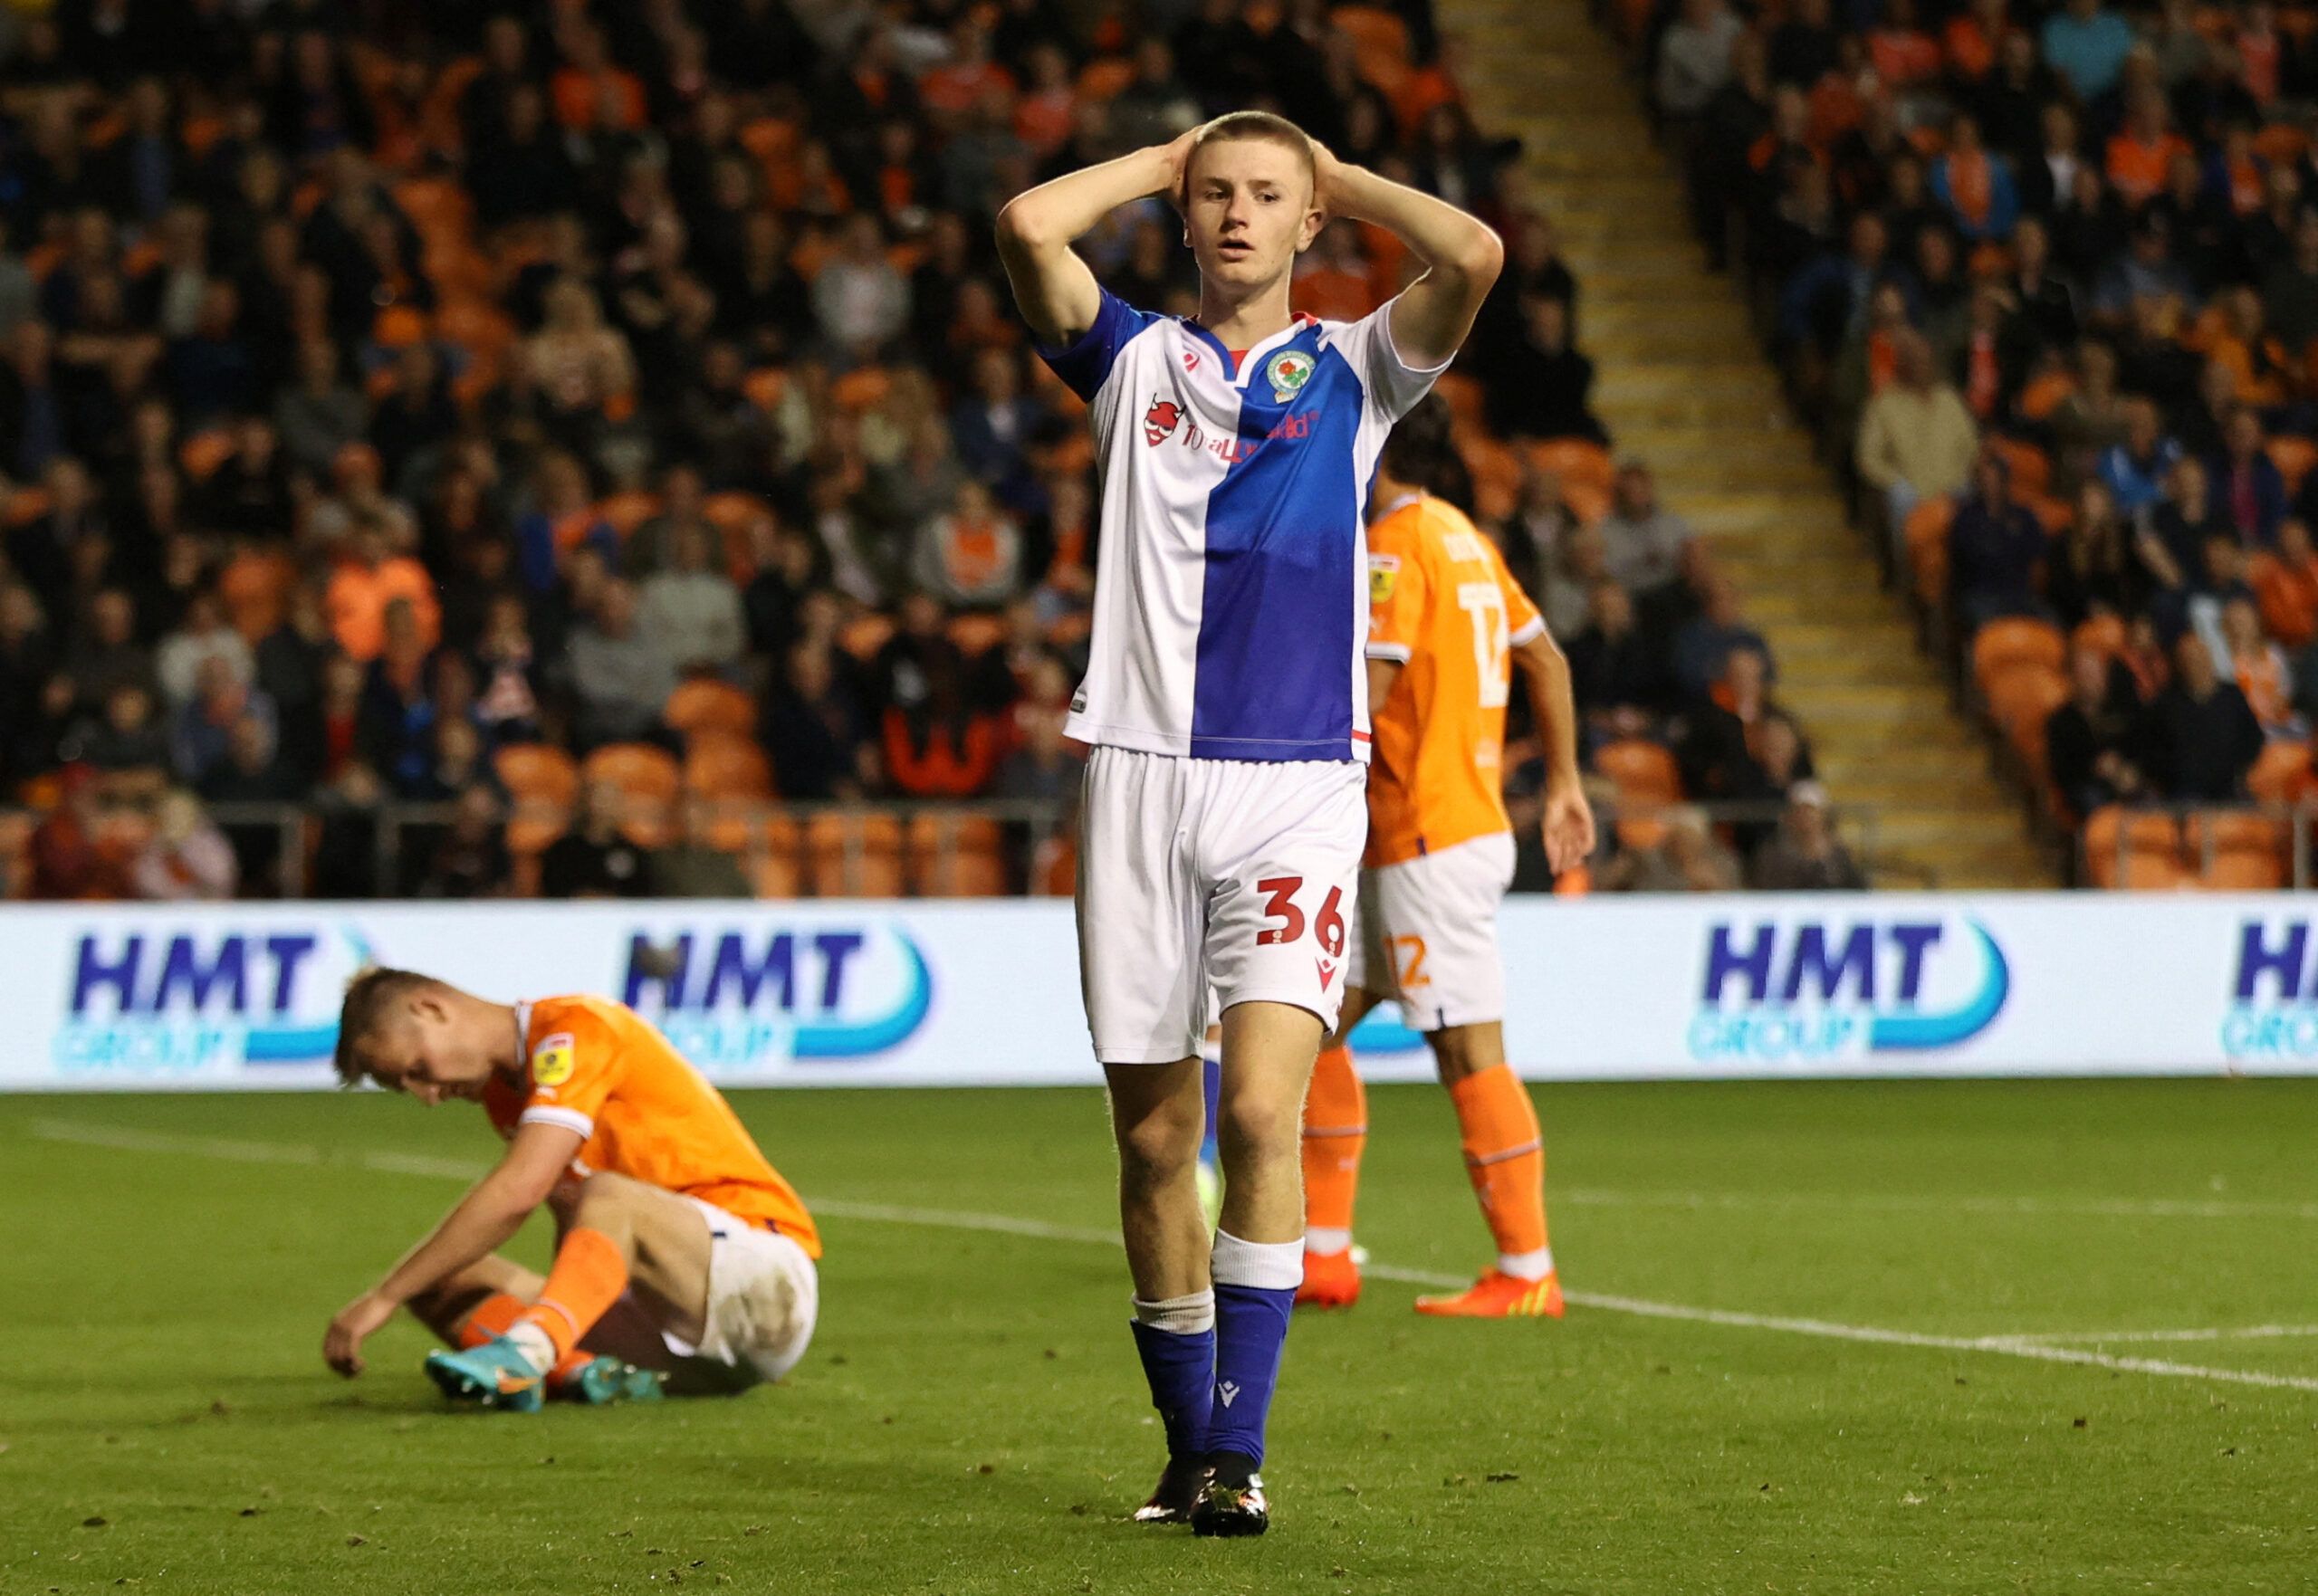 Soccer Football - Championship - Blackpool v Blackburn Rovers - Bloomfield Road, Blackpool, Britain - August 31, 2022 Blackburn Rovers' Adam Wharton reacts  Action Images/Molly Darlington  EDITORIAL USE ONLY. No use with unauthorized audio, video, data, fixture lists, club/league logos or 